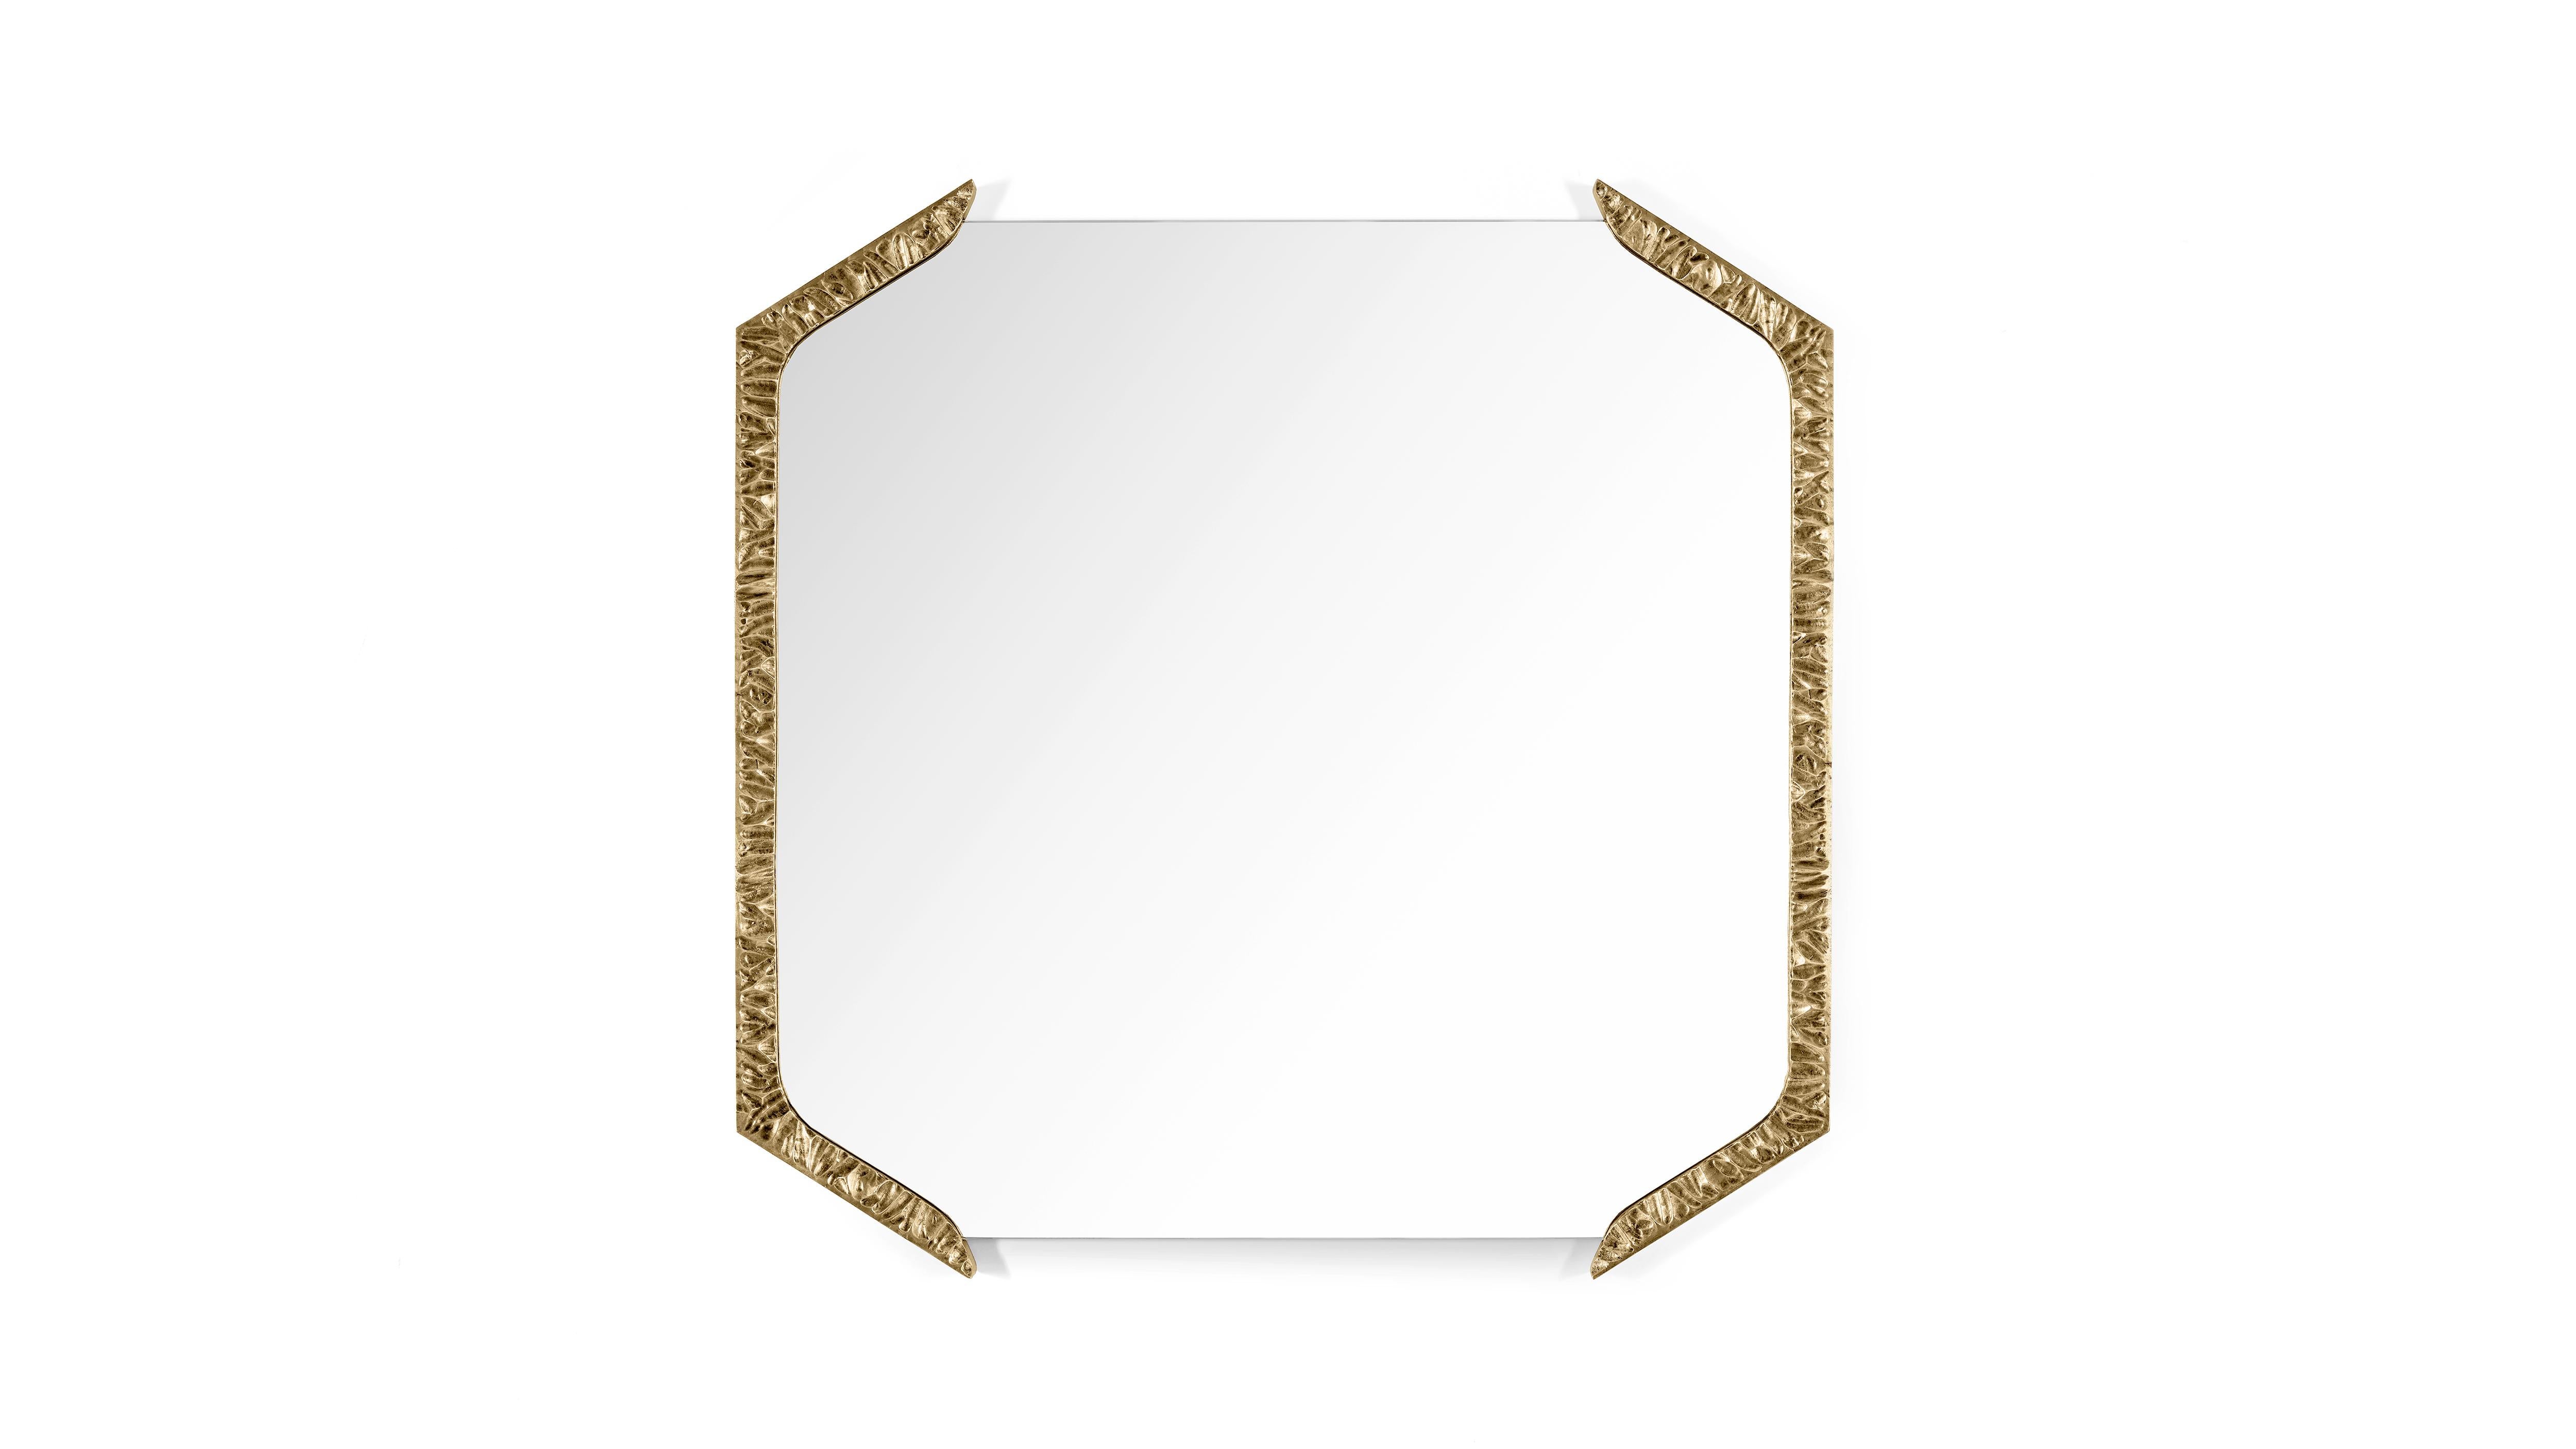 Alentejo Brass Square Mirror by InsidherLand
Dimensions: D 3 x W 85 x H 85 cm.
Materials: Patinated cast brass, clear mirror.
22 kg.
Available in other finishes.

Alentejo mirror has the similar conceptual approach to the typical cork oaks trees we